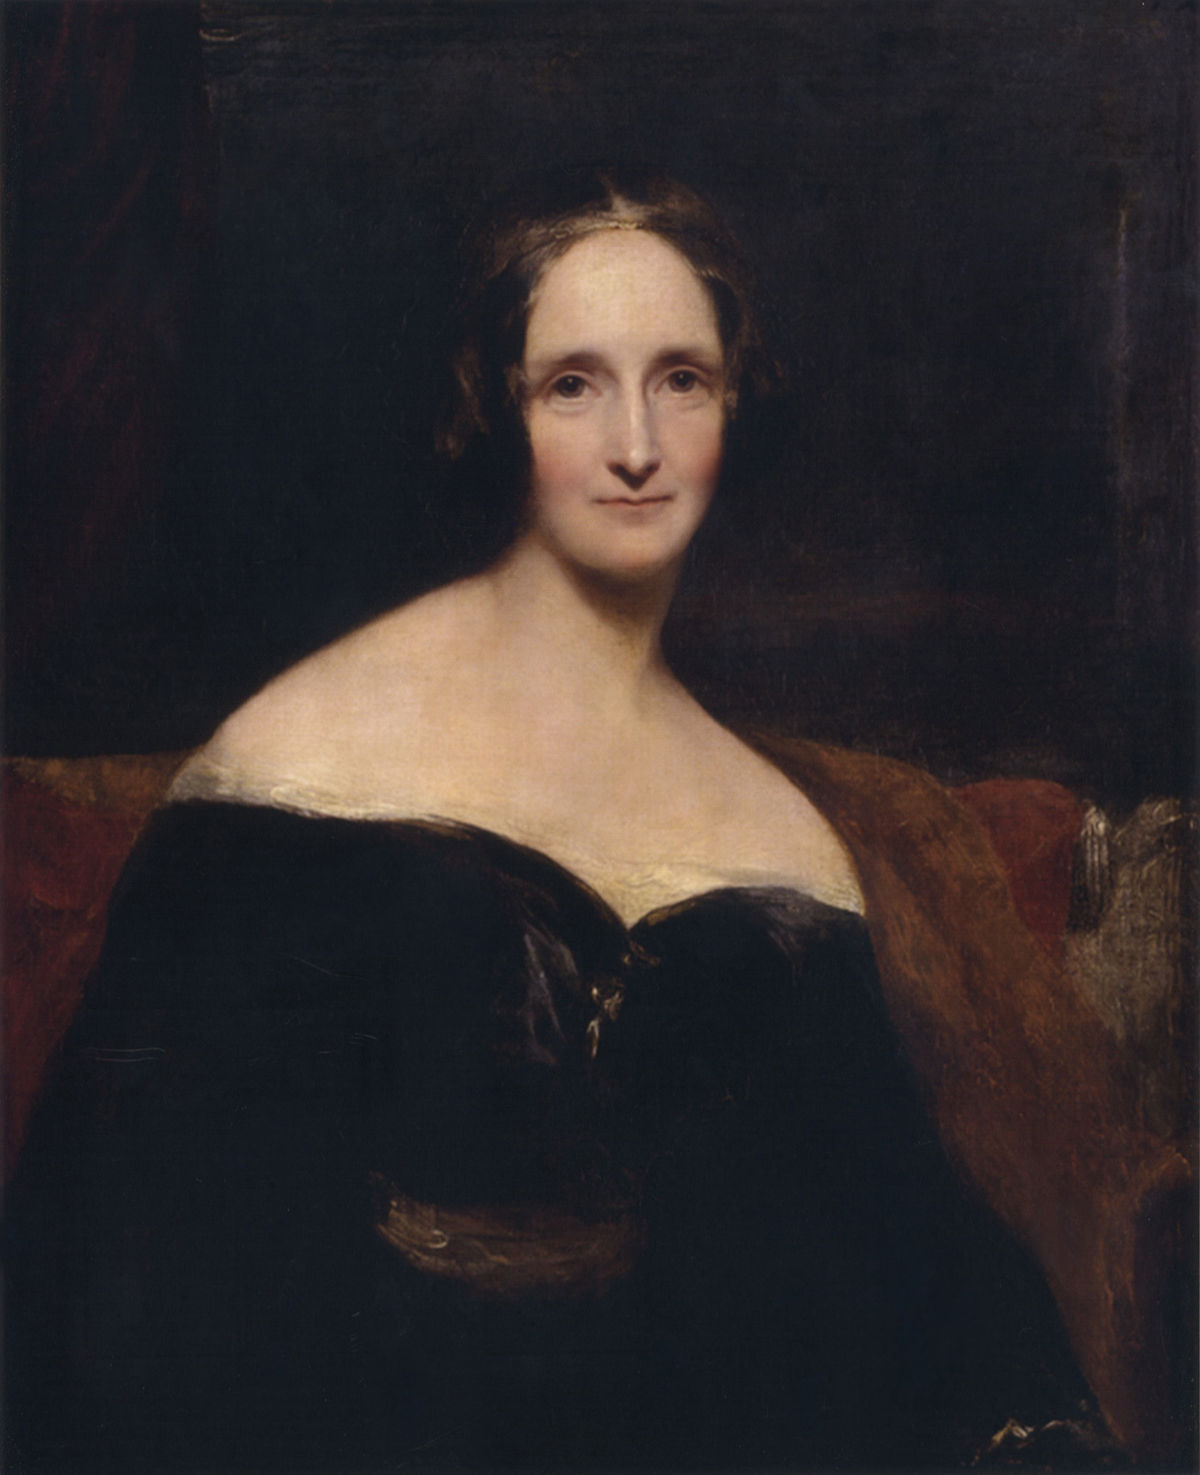 A painting of Mary Shelley.